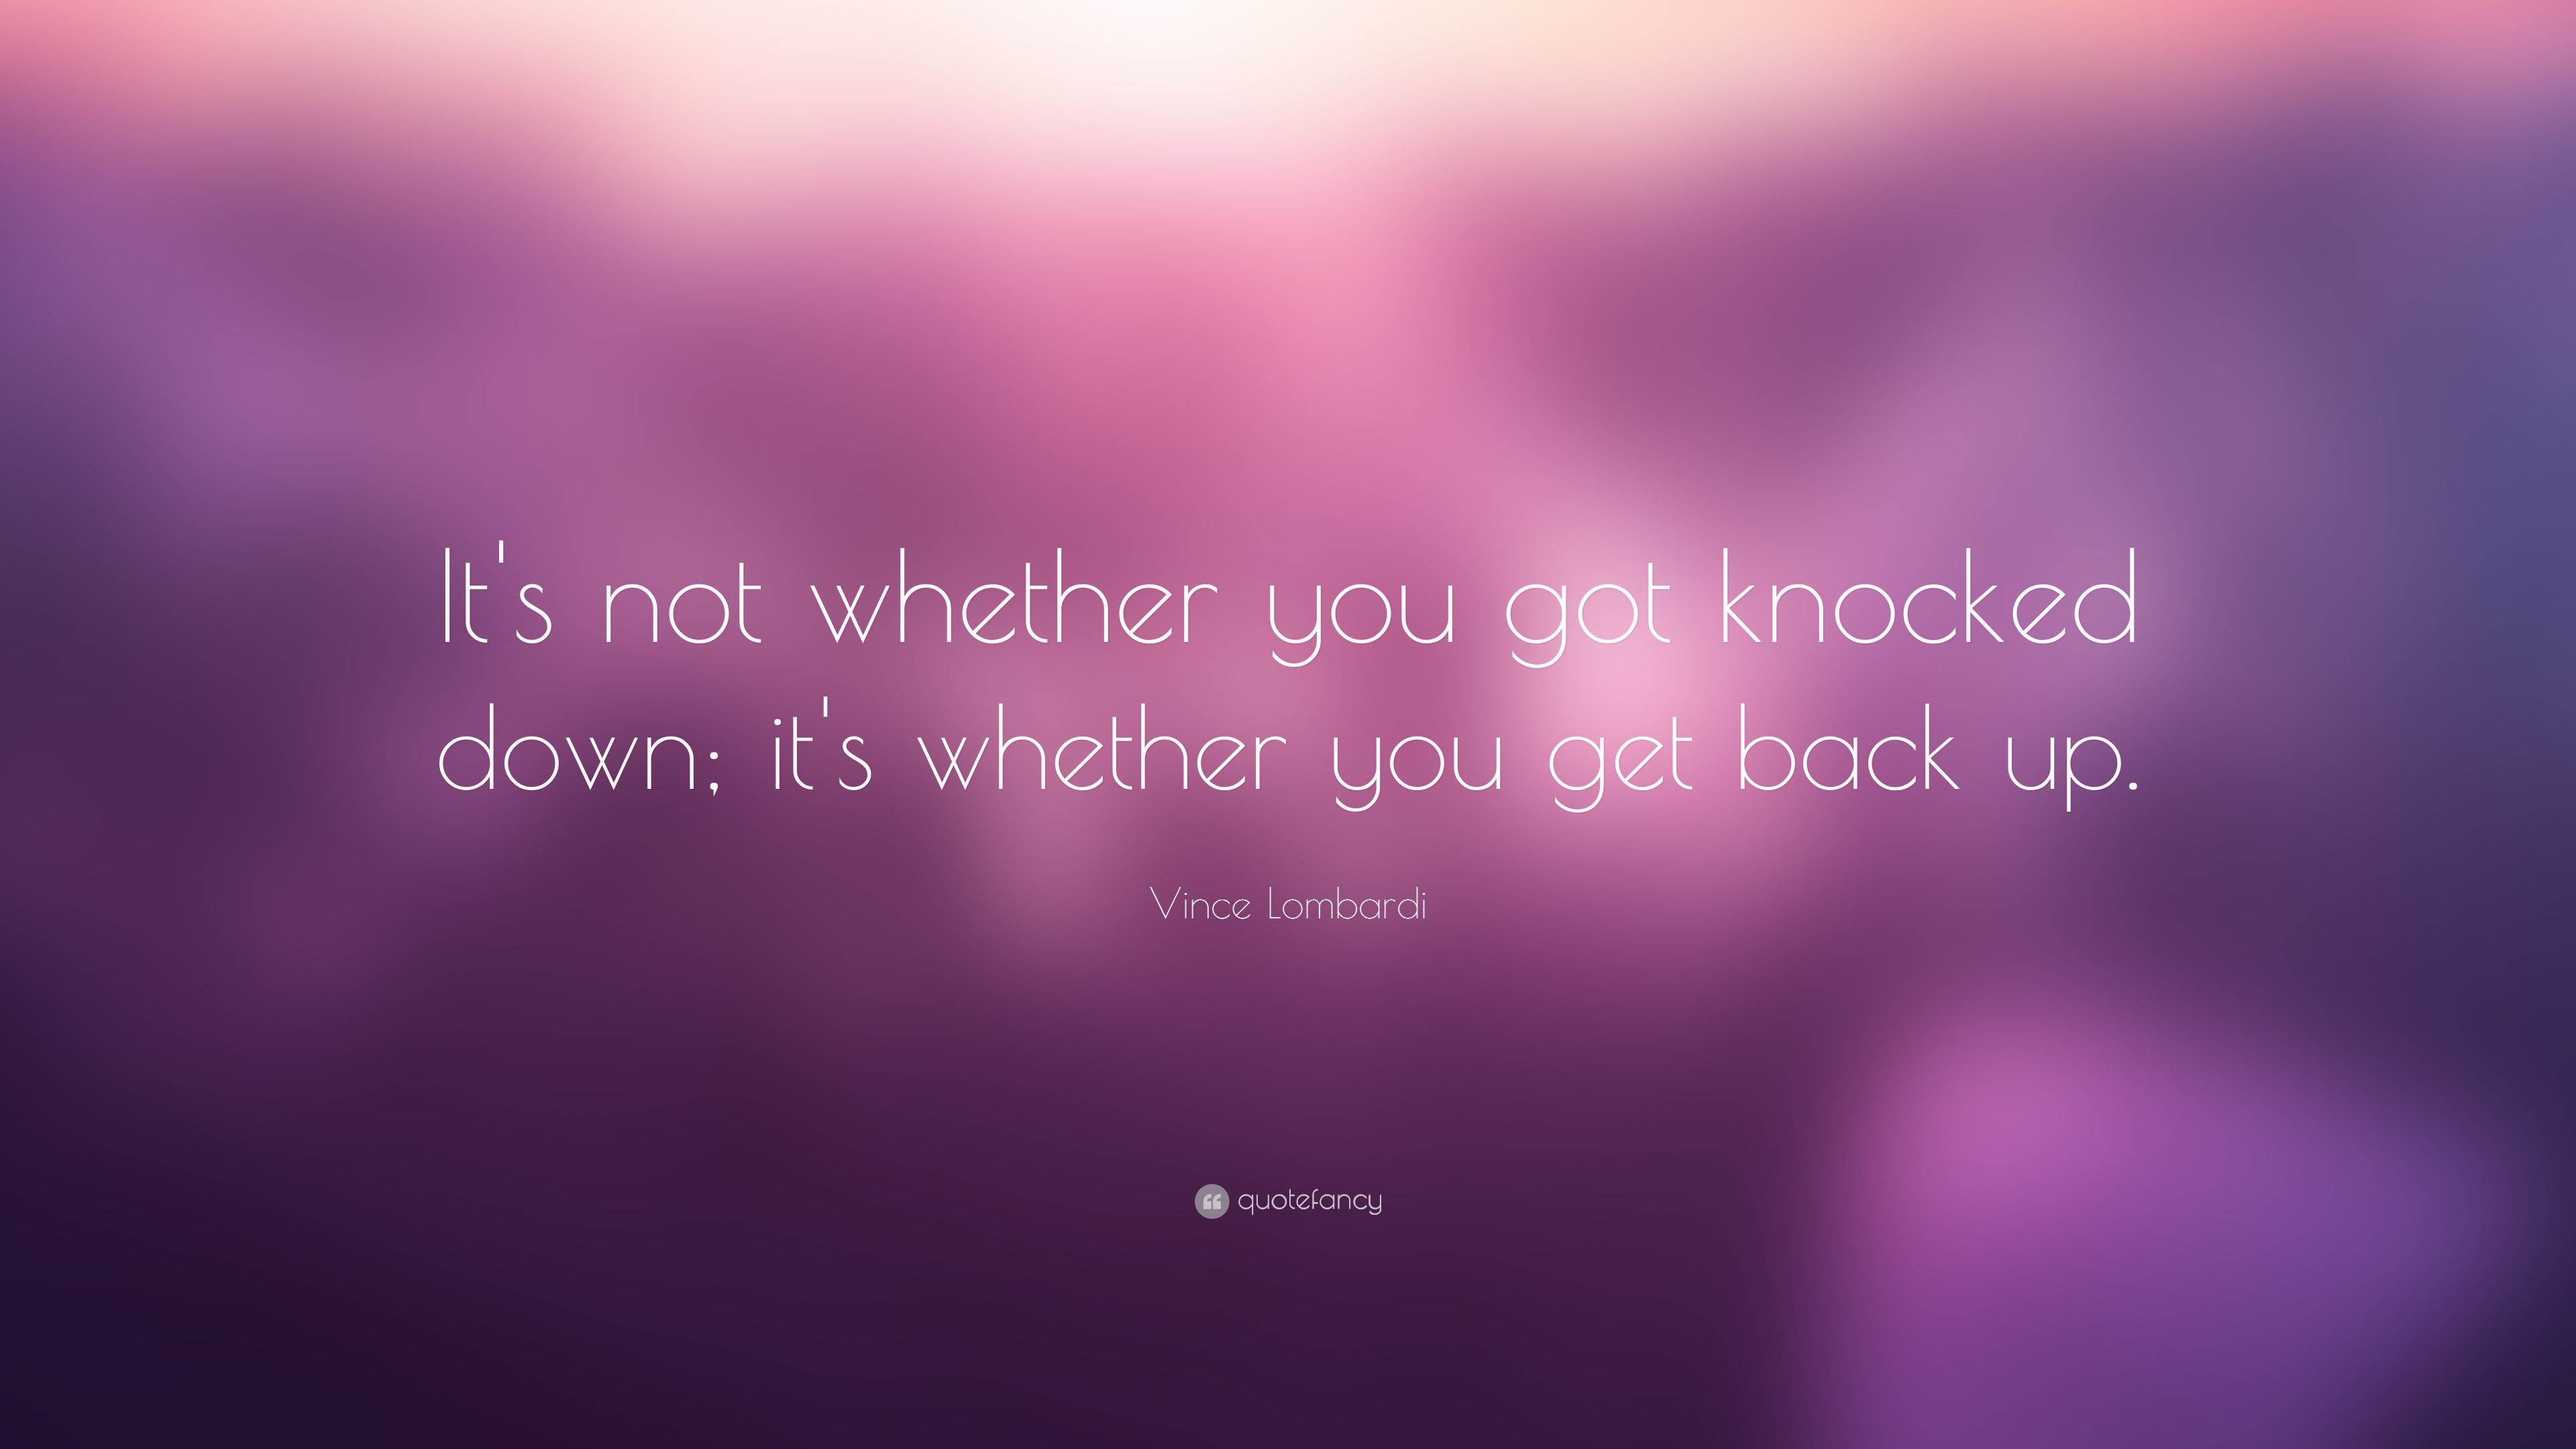 Vince Lombardi Quote: “It's not whether you got knocked down; it's whether you get back up.” (13 wallpaper)